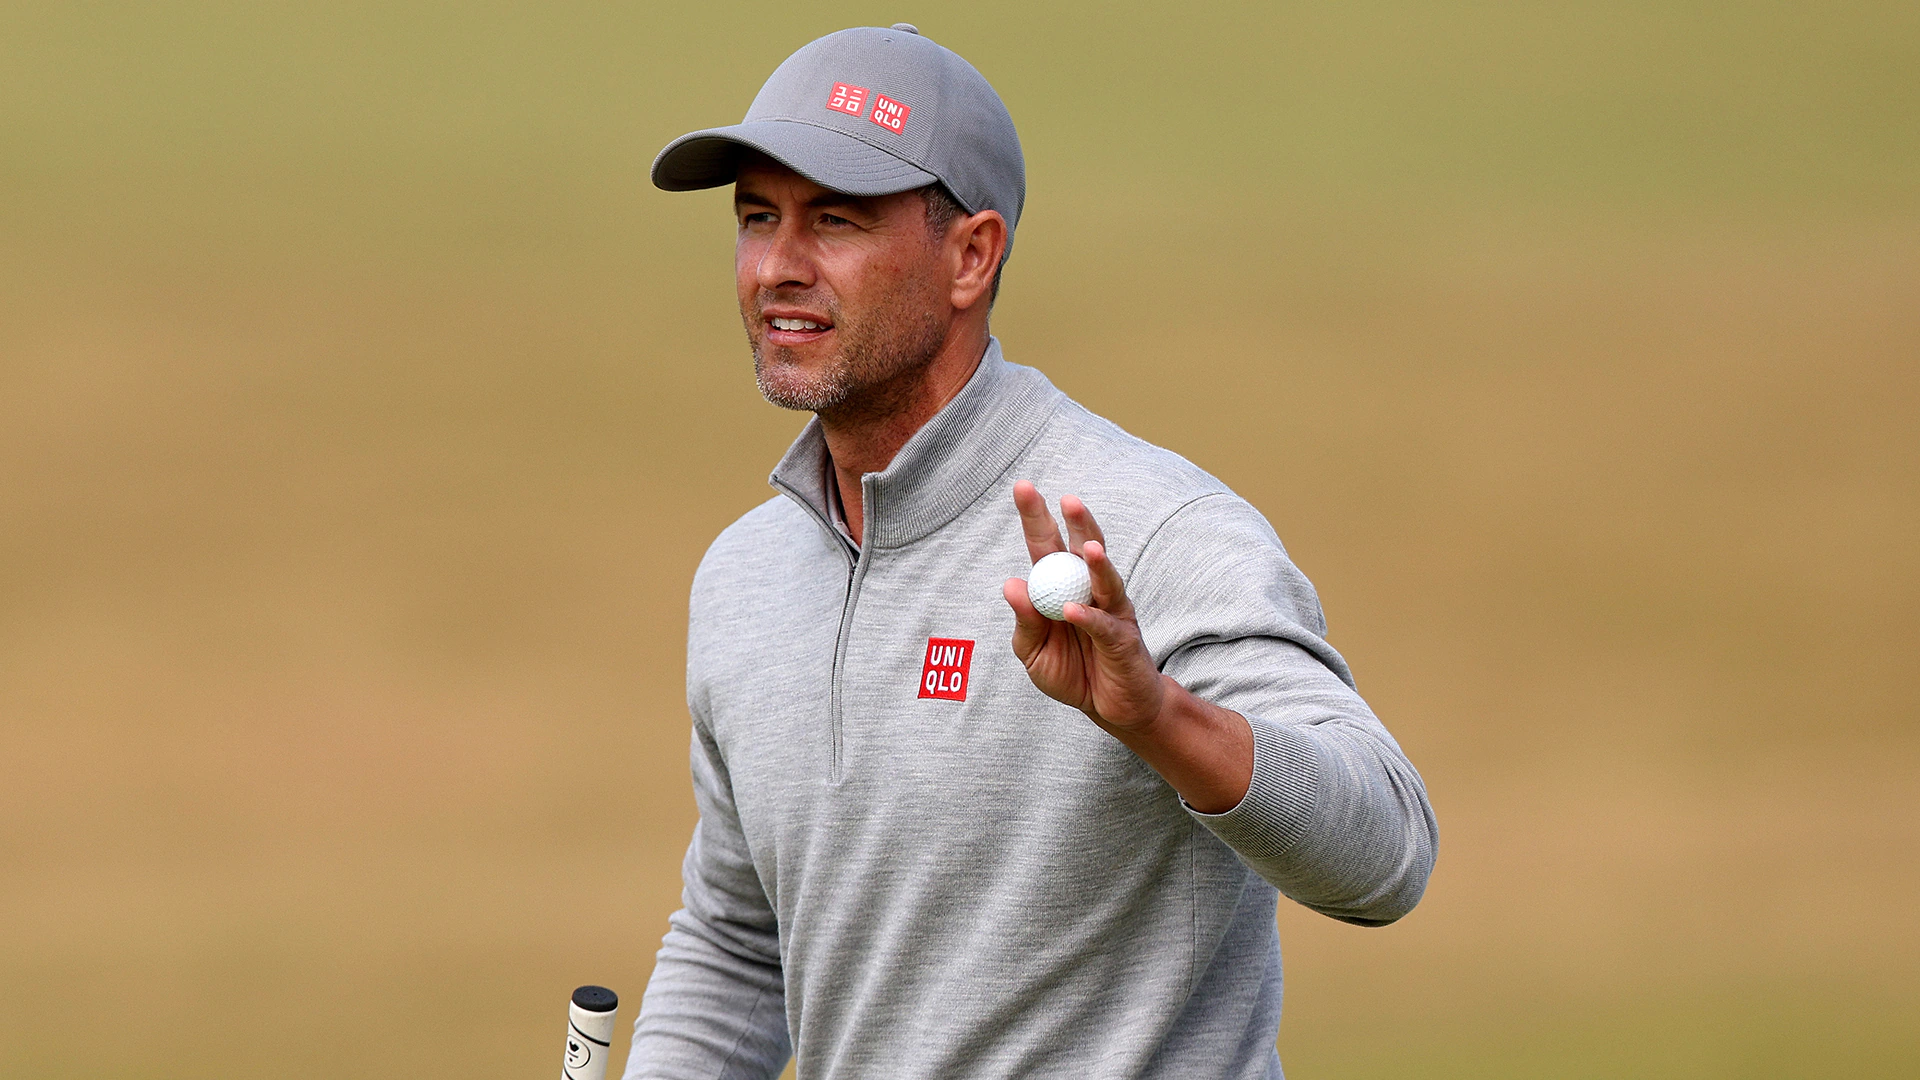 2022 British Open: Hurt by Open failures, Adam Scott bounces back into contention at St. Andrews